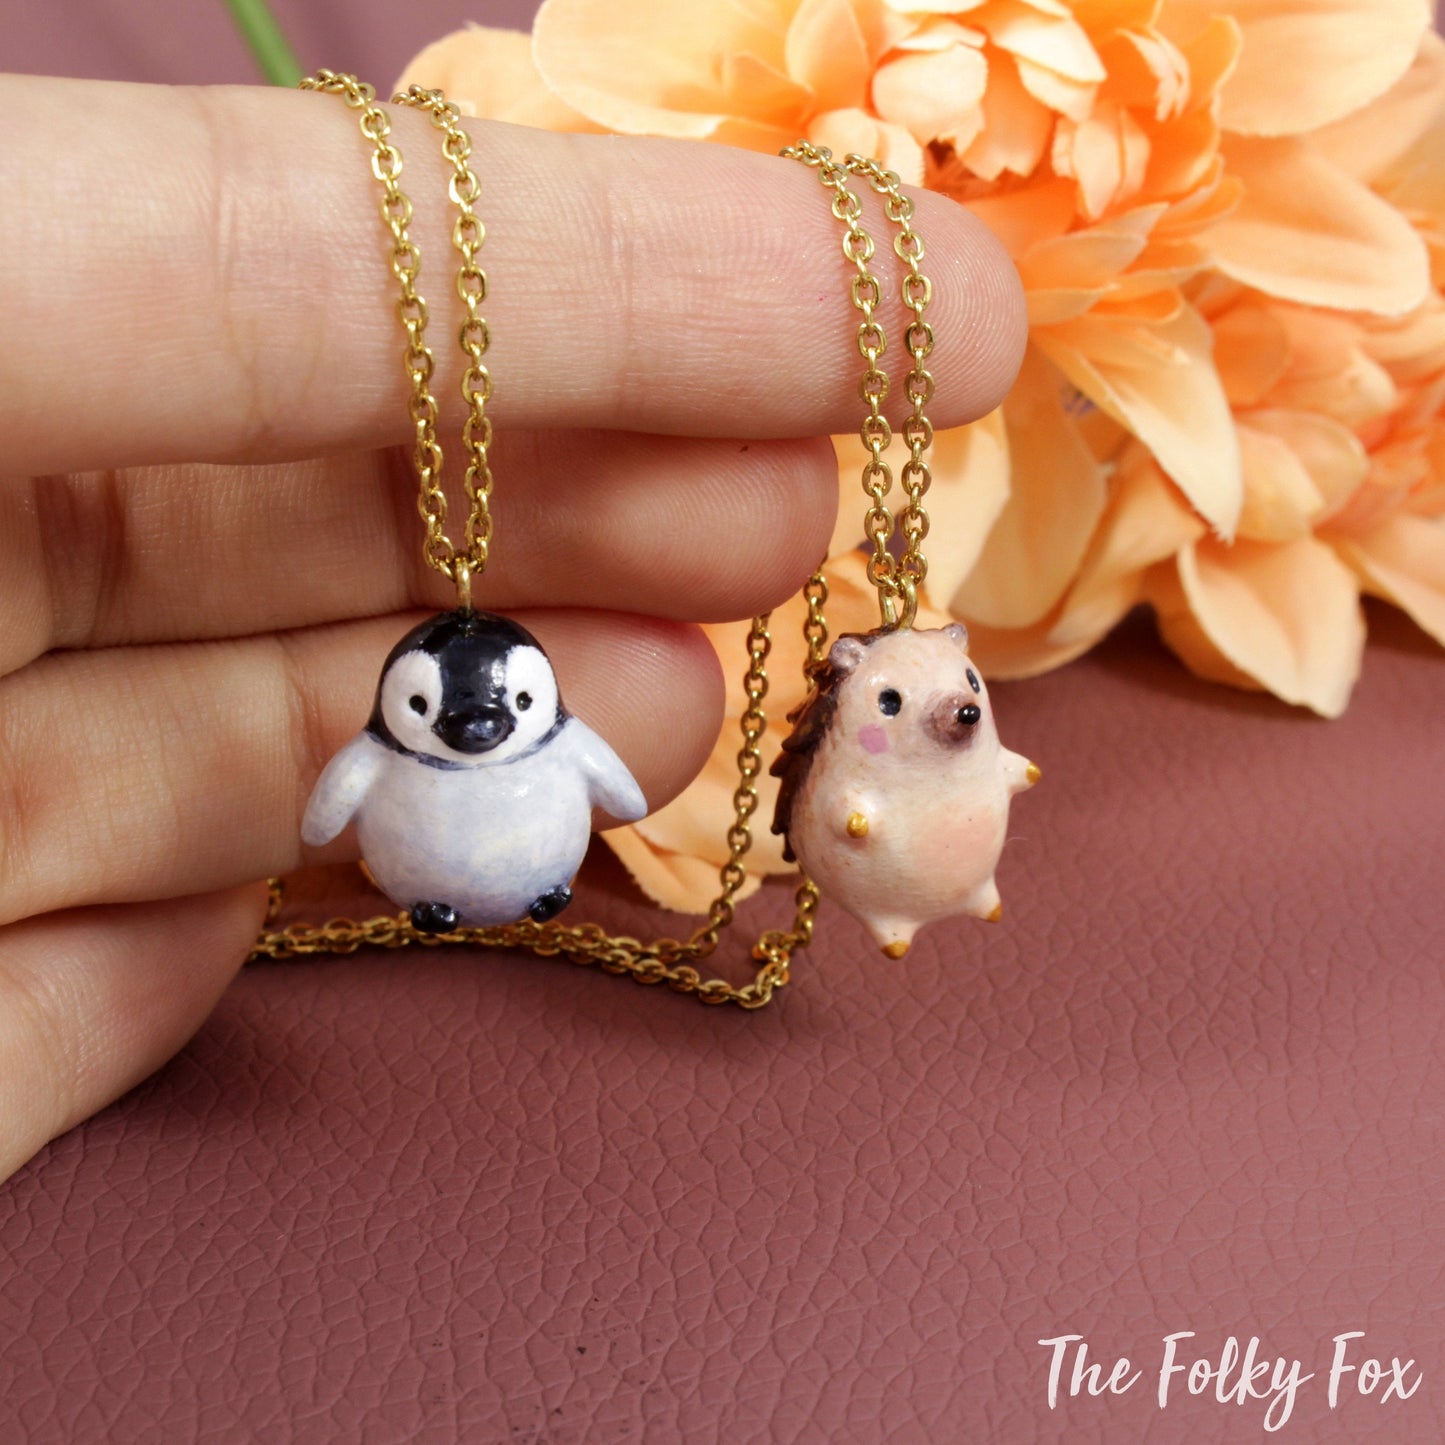 Penguin Necklace in Polymer Clay - The Folky Fox